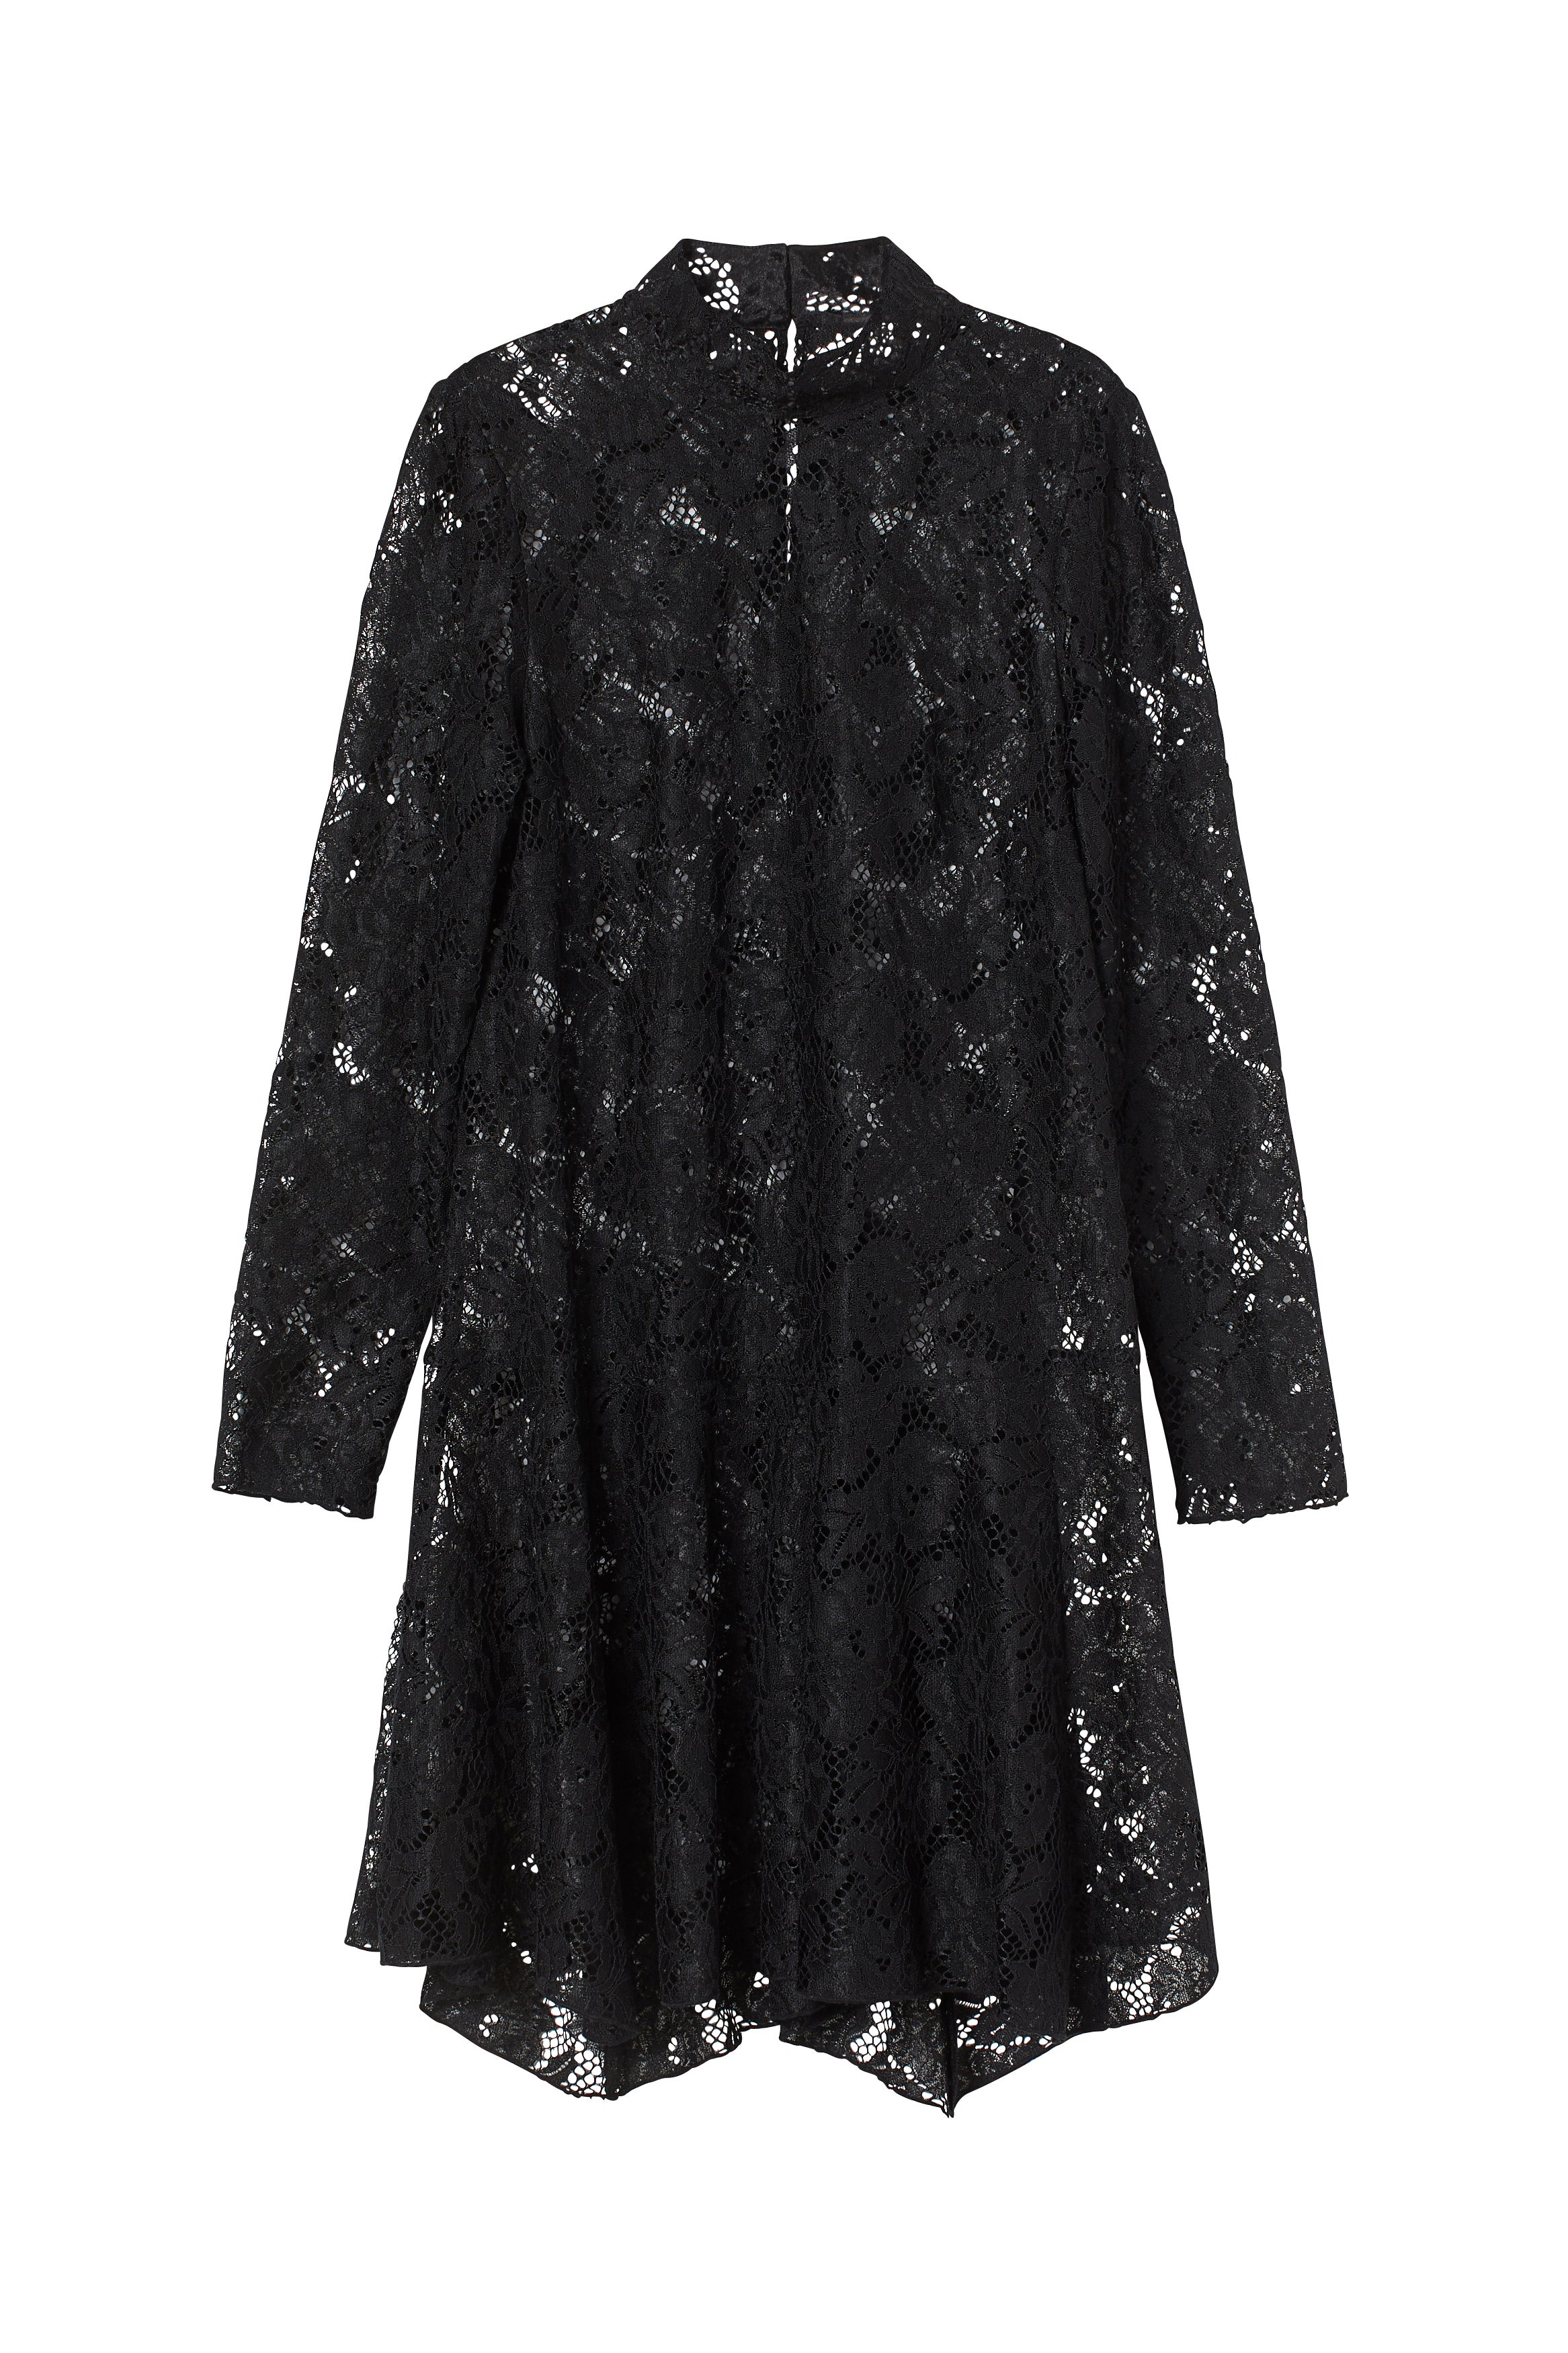 H&M + Lace stand-up collar dress